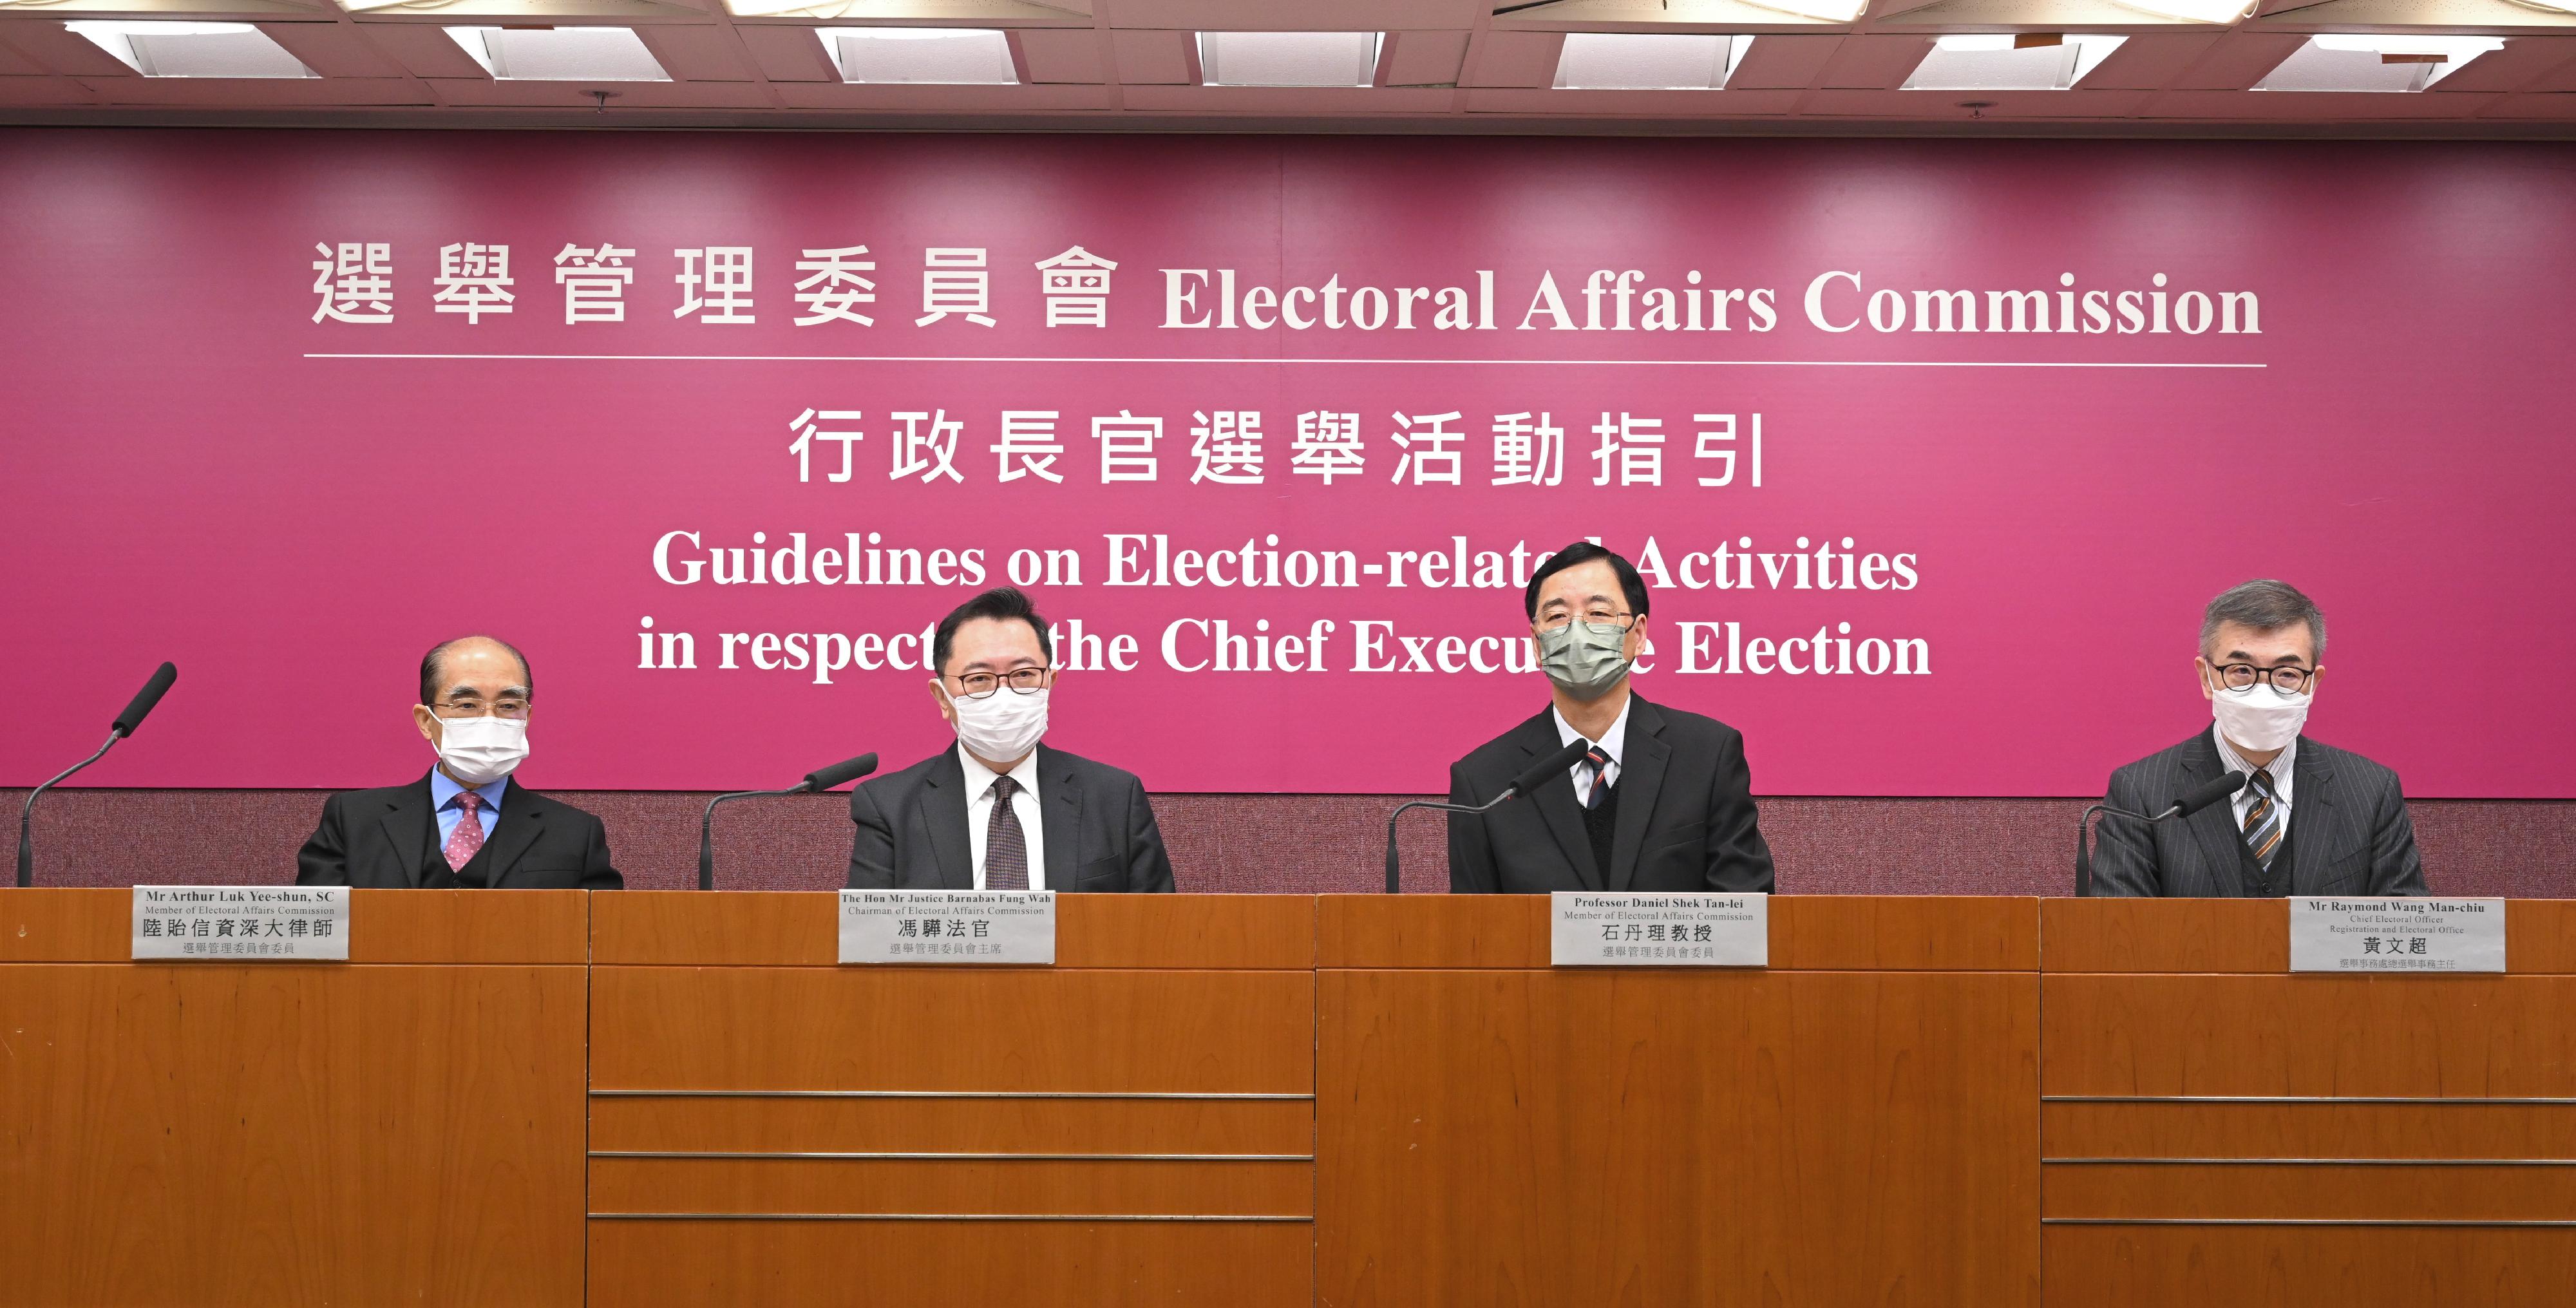 The Chairman of the Electoral Affairs Commission (EAC), Mr Justice Barnabas Fung Wah (second left), today (January 27) hosts the press conference on the Guidelines on Election-related Activities in respect of the Chief Executive Election. Also present are EAC members Mr Arthur Luk, SC (first left); Professor Daniel Shek (second right), and the Chief Electoral Officer of the Registration and Electoral Office, Mr Raymond Wang (first right).